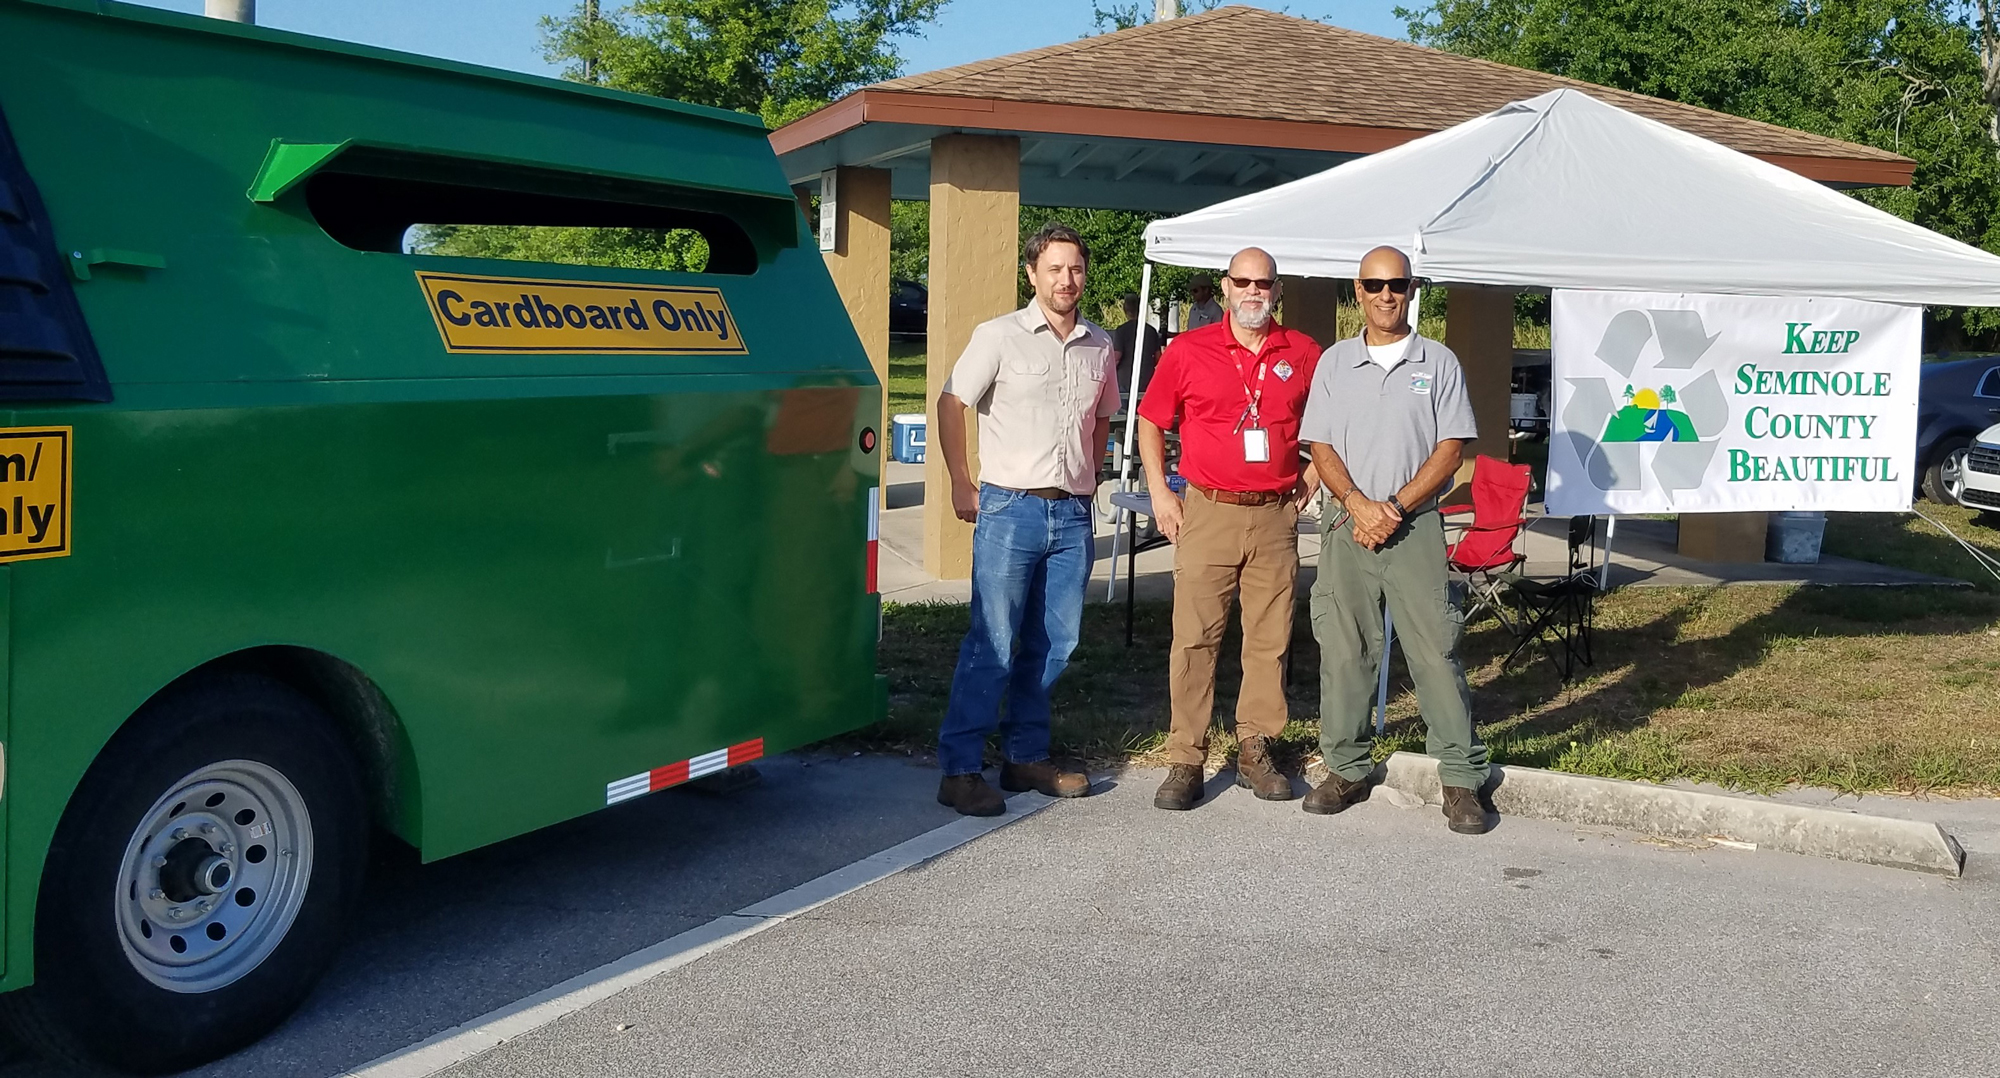 three seminole county solid waste management employees standing outside next to "BART" recycling trailer